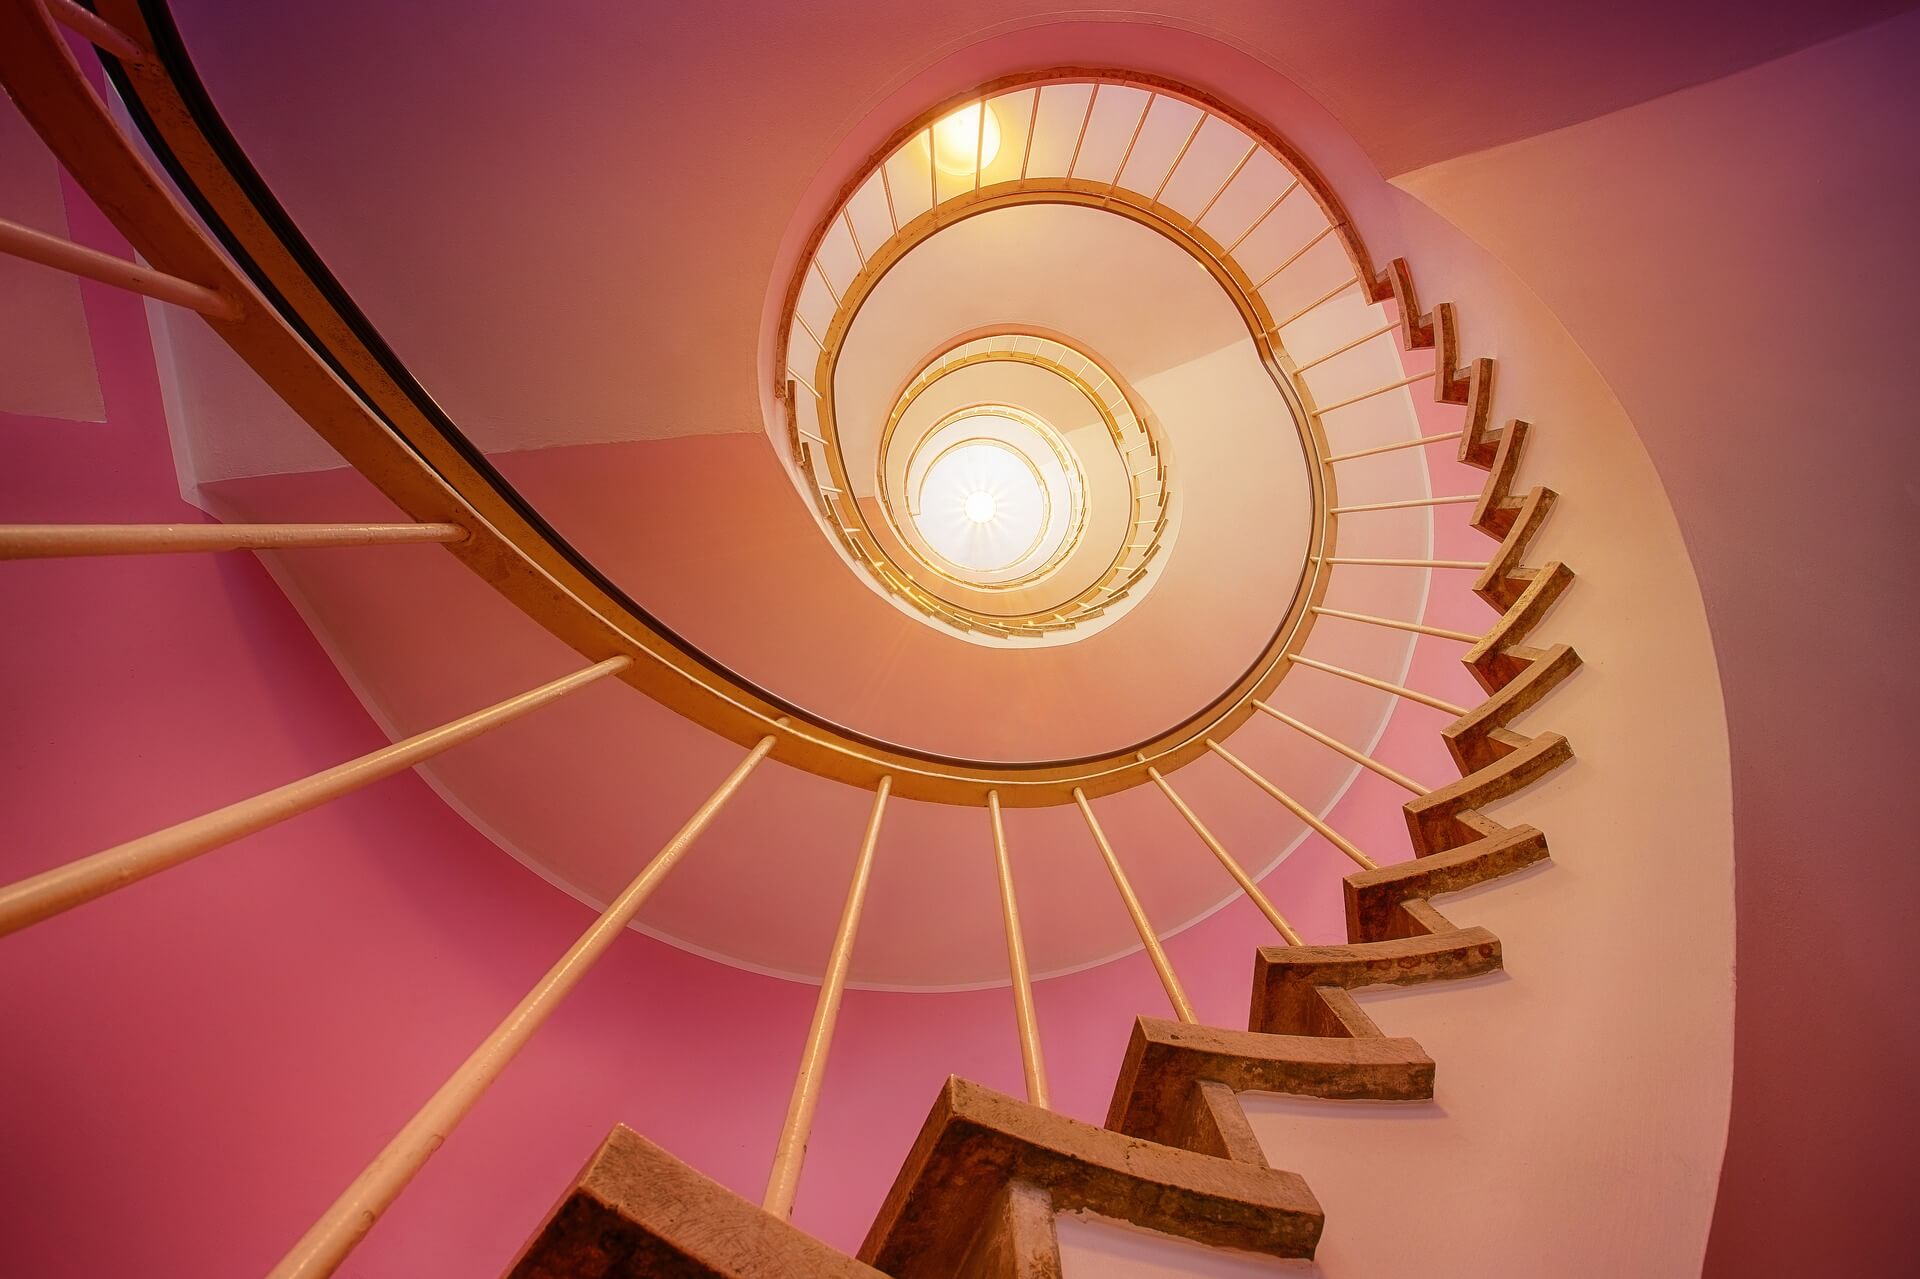 Stairs leading to the light